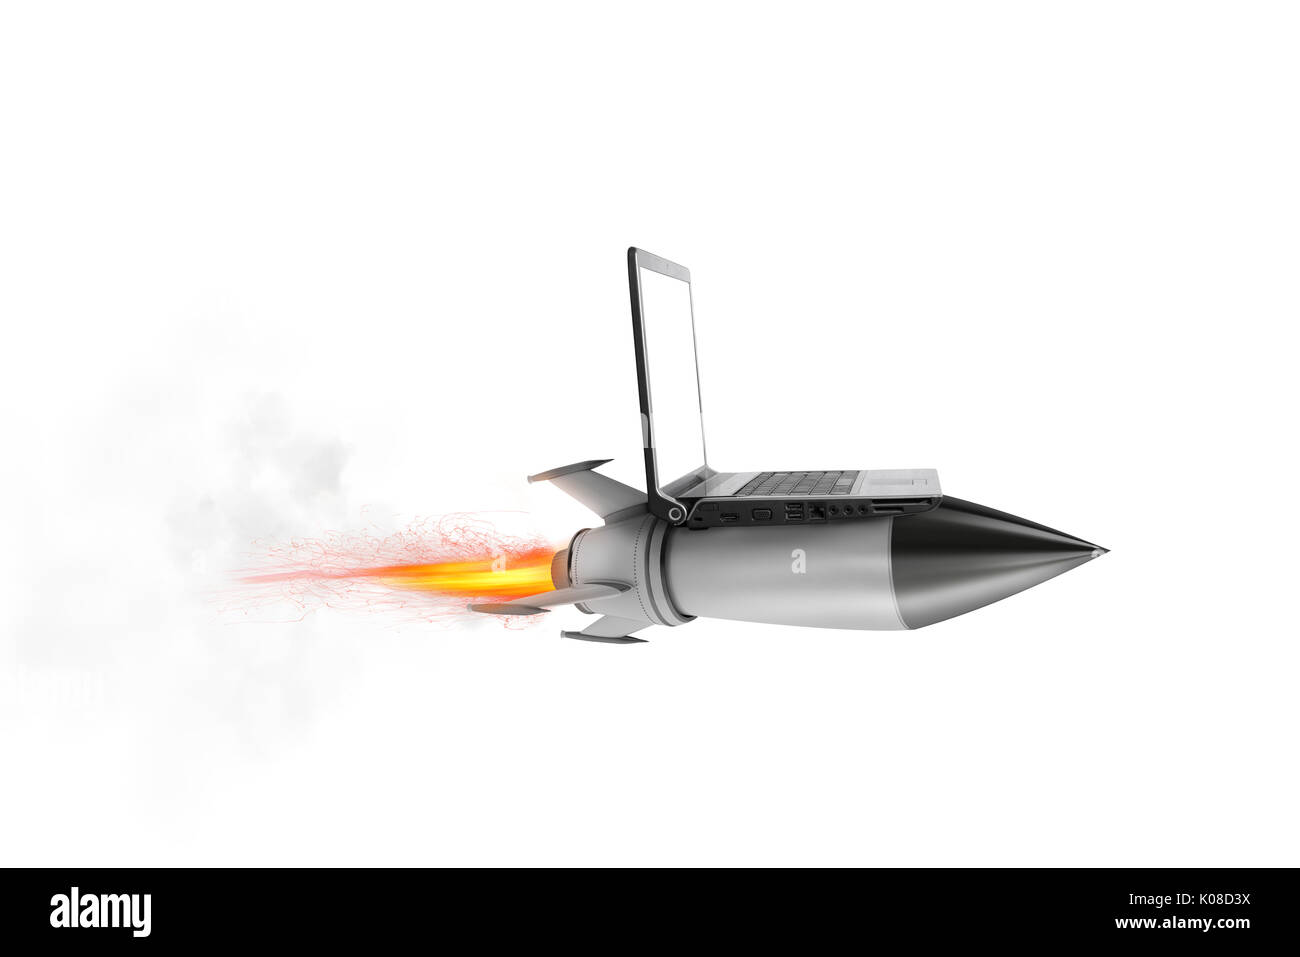 Fast internet concept with a laptop over a rocket Stock Photo